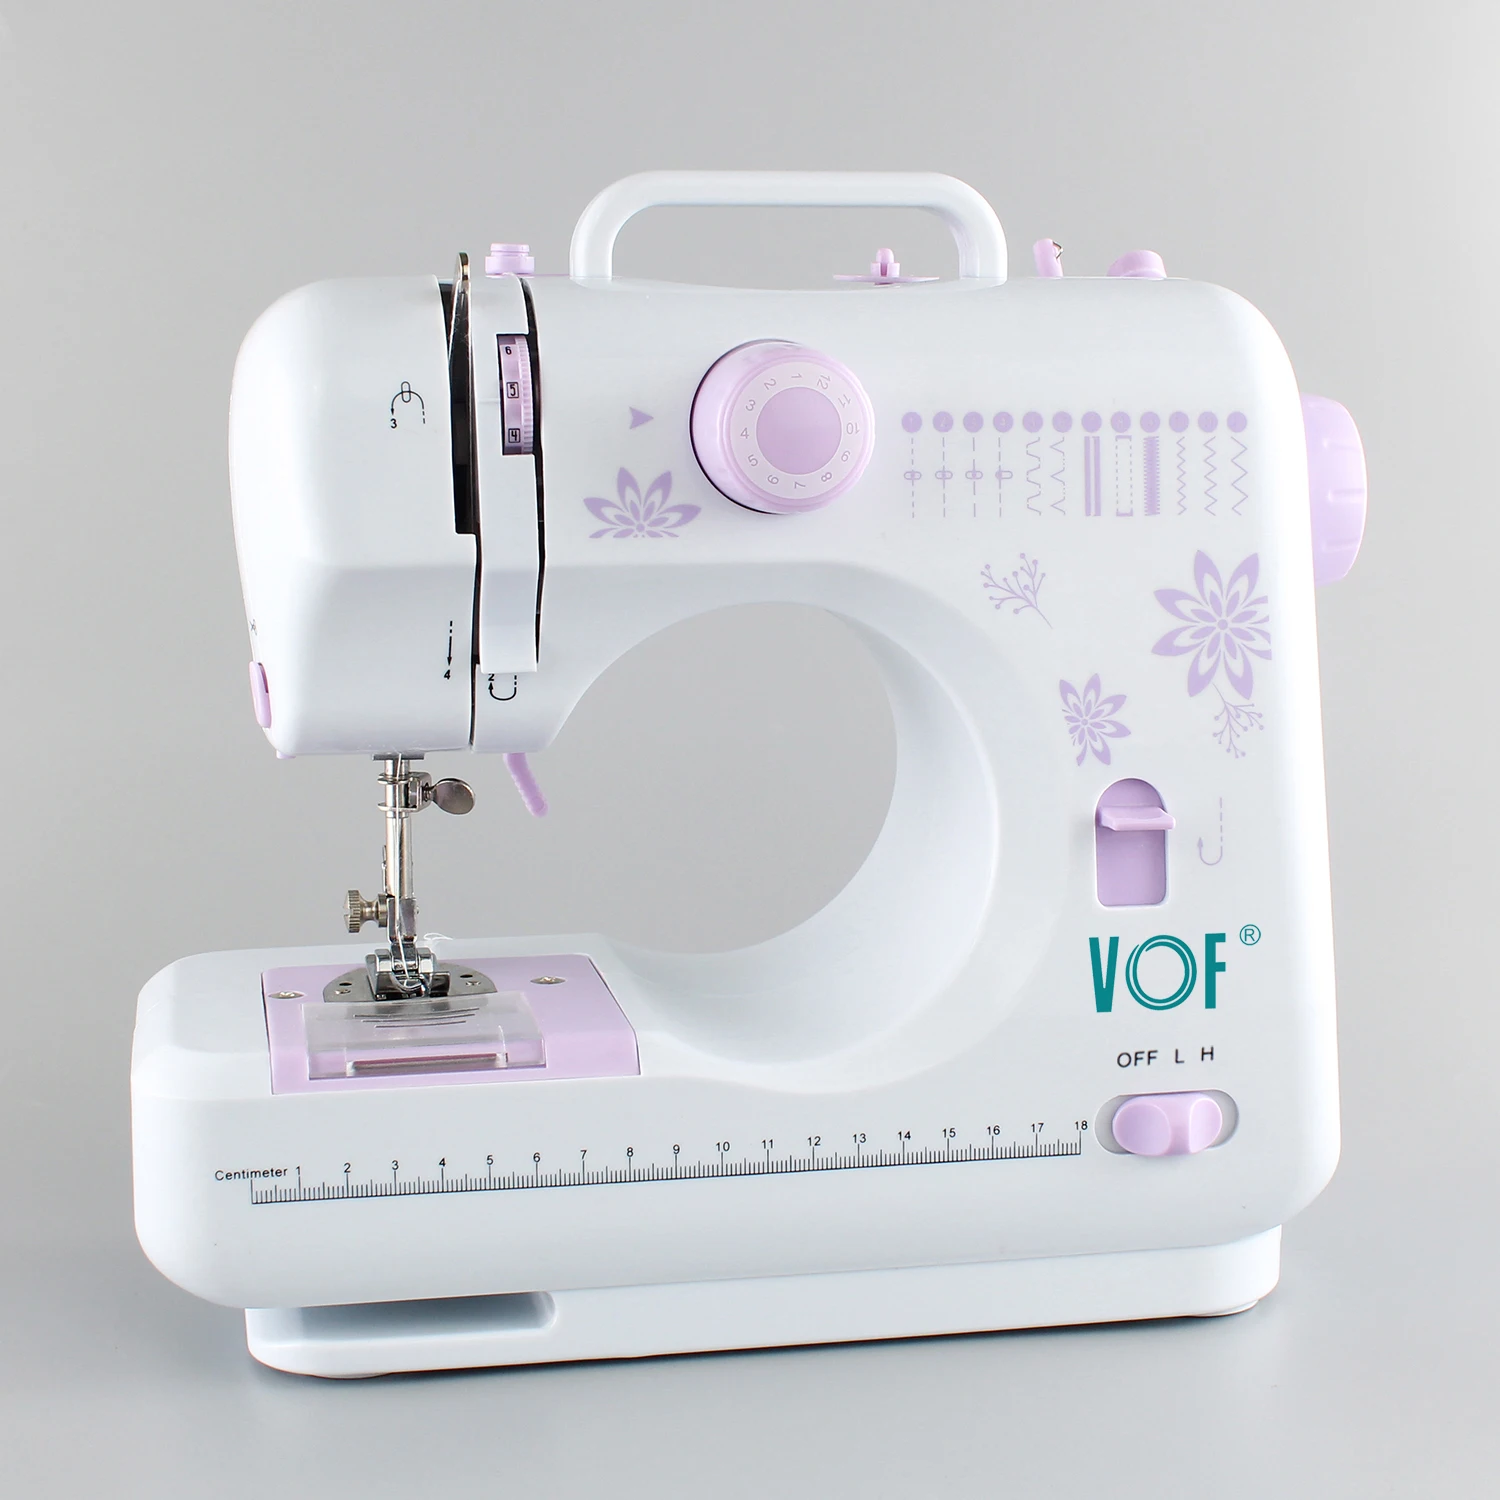 
VOF 2021Hot Sell FHSM 505G electric handheld overlock sewing machine with foot pedal 